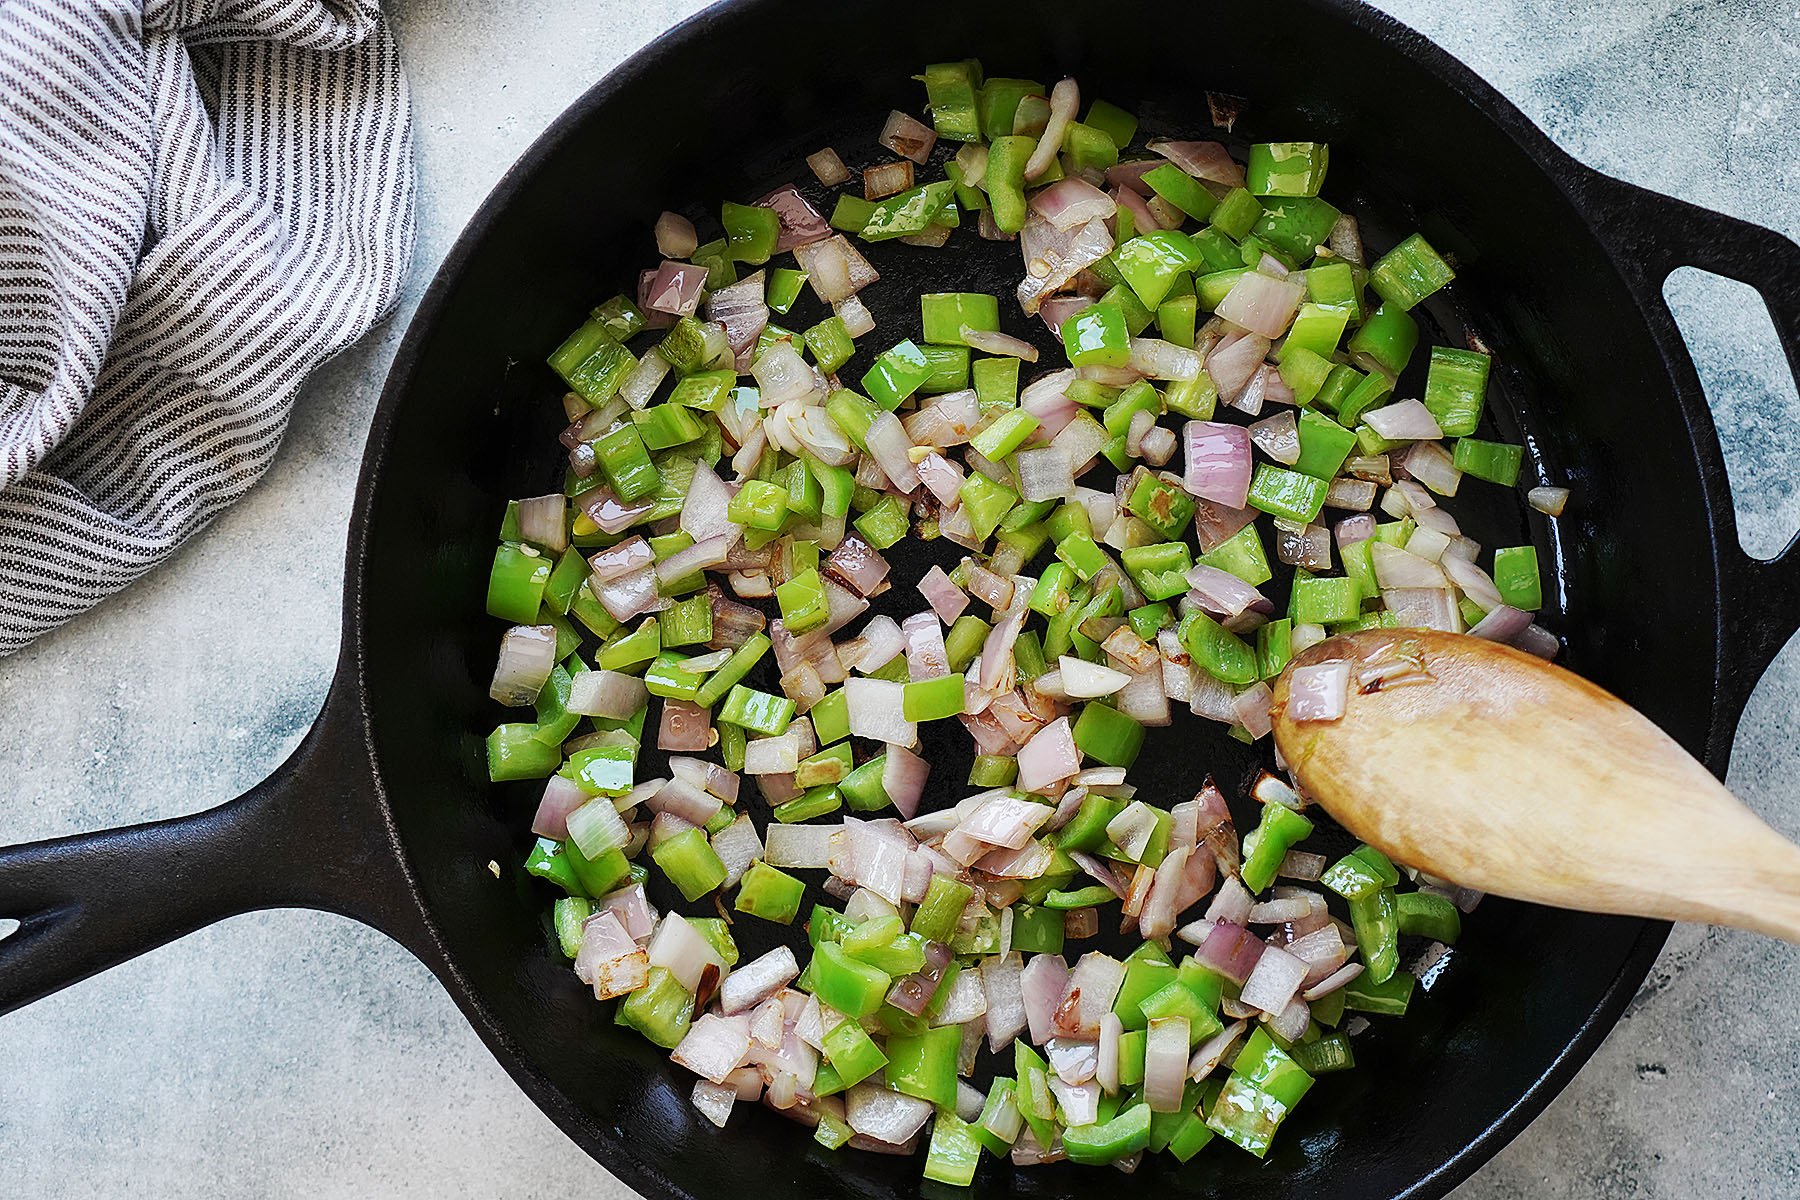 Sautéing onions and green peppers on an iron skillet